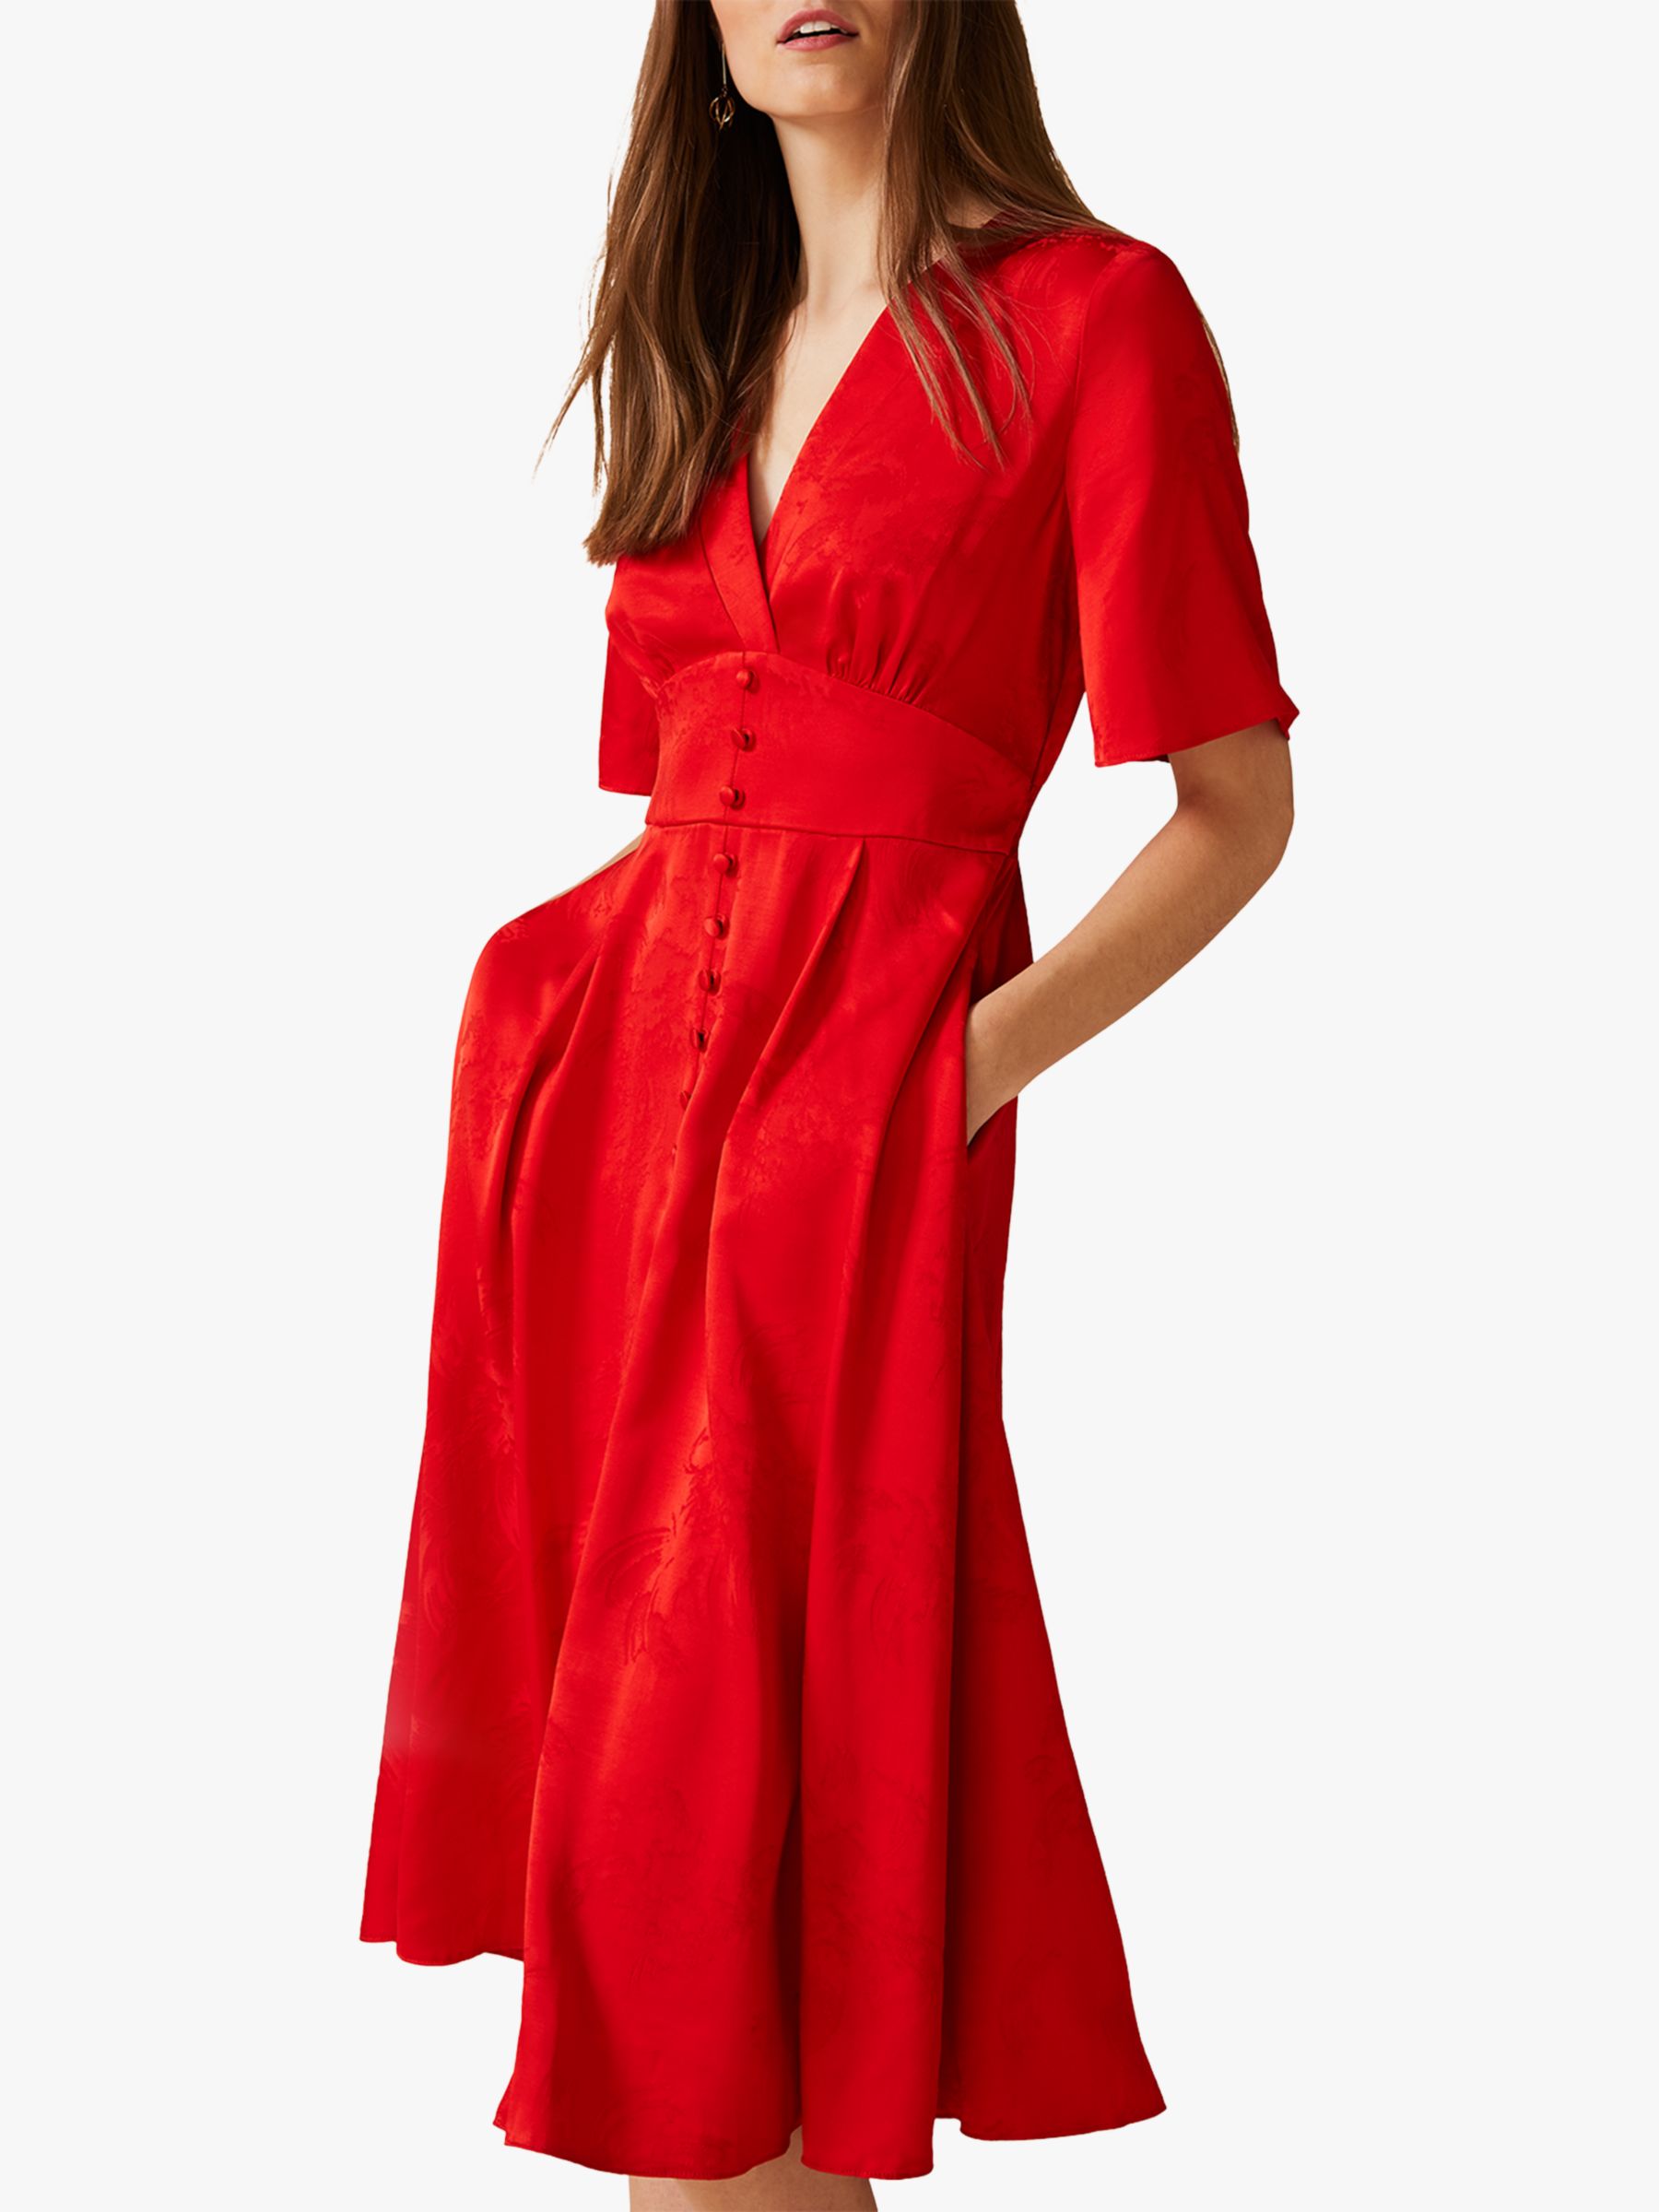 Phase Eight Caprice Jacquard Dress, Red